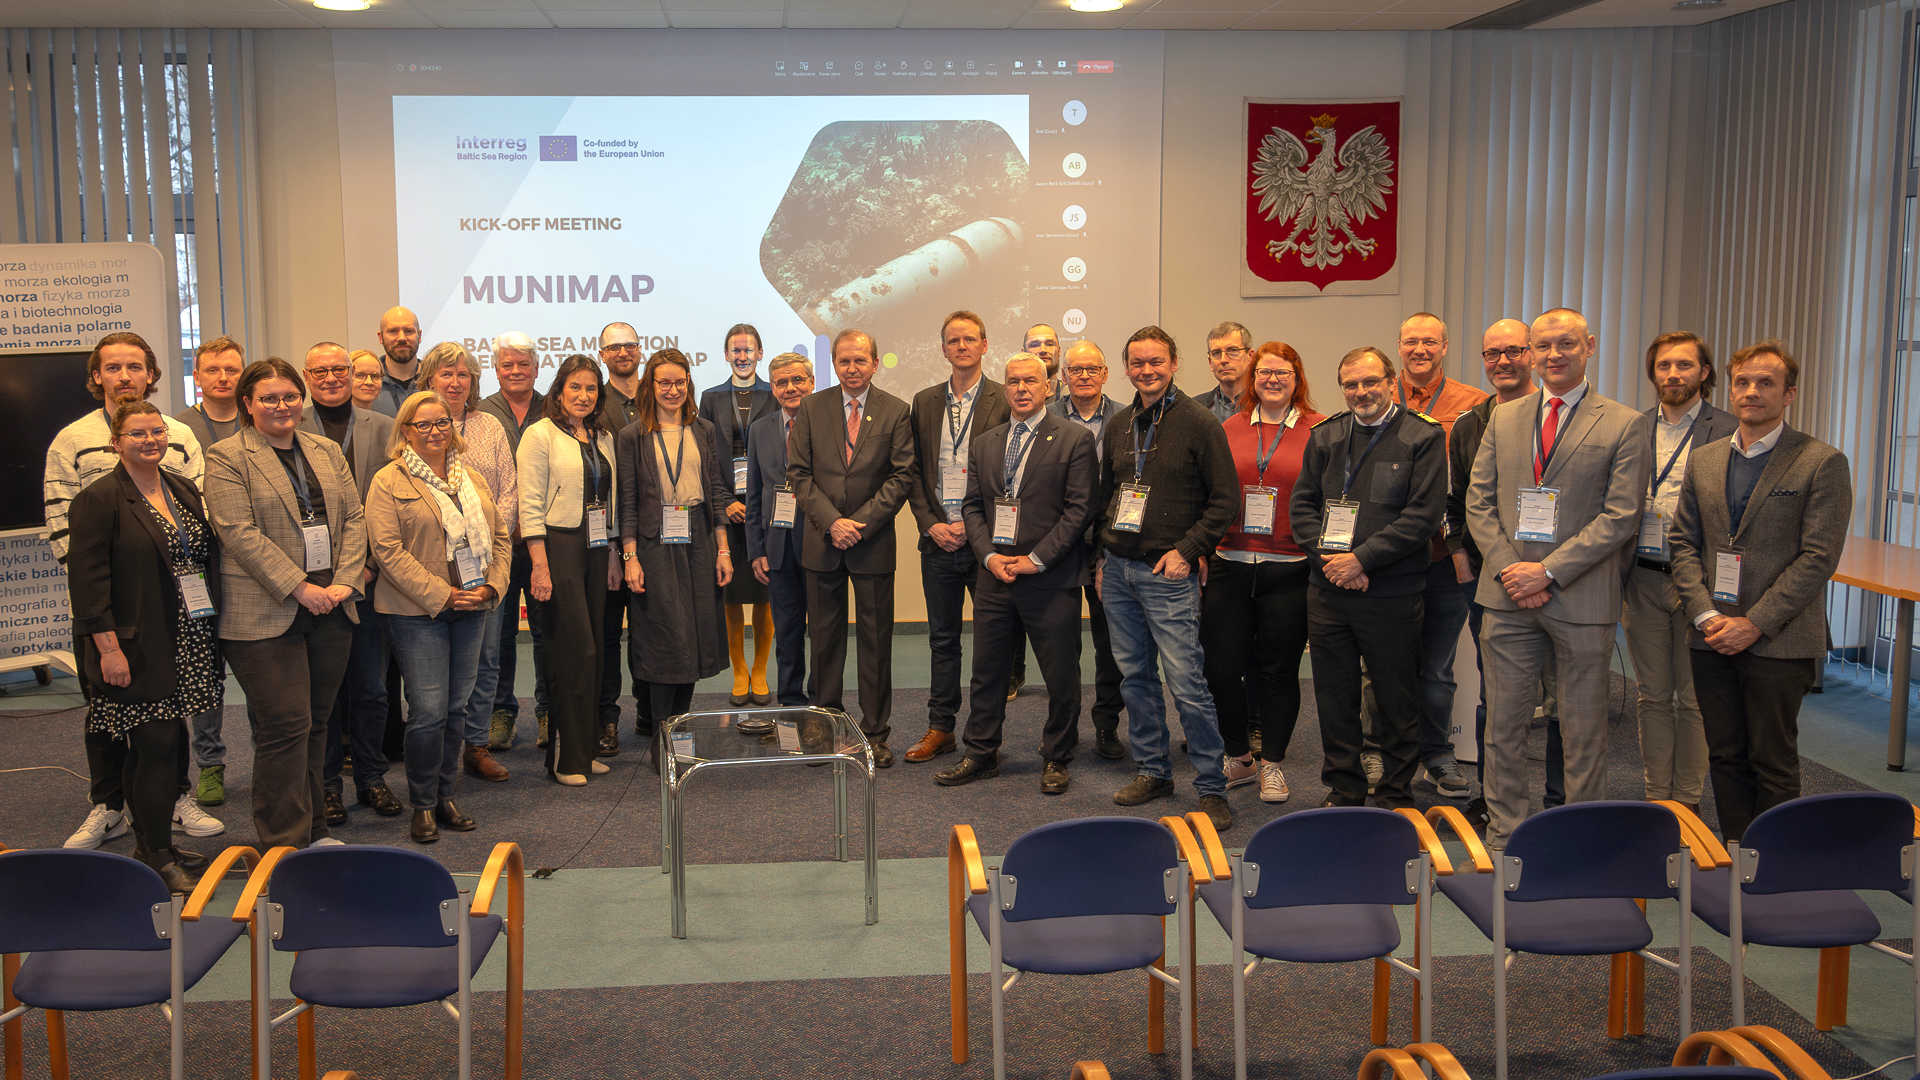 The inaugural MUNIMAP meeting brought together not only project partners but also representatives from associated organizations, including government and local authorities, NGOs, and the offshore and maritime industry.